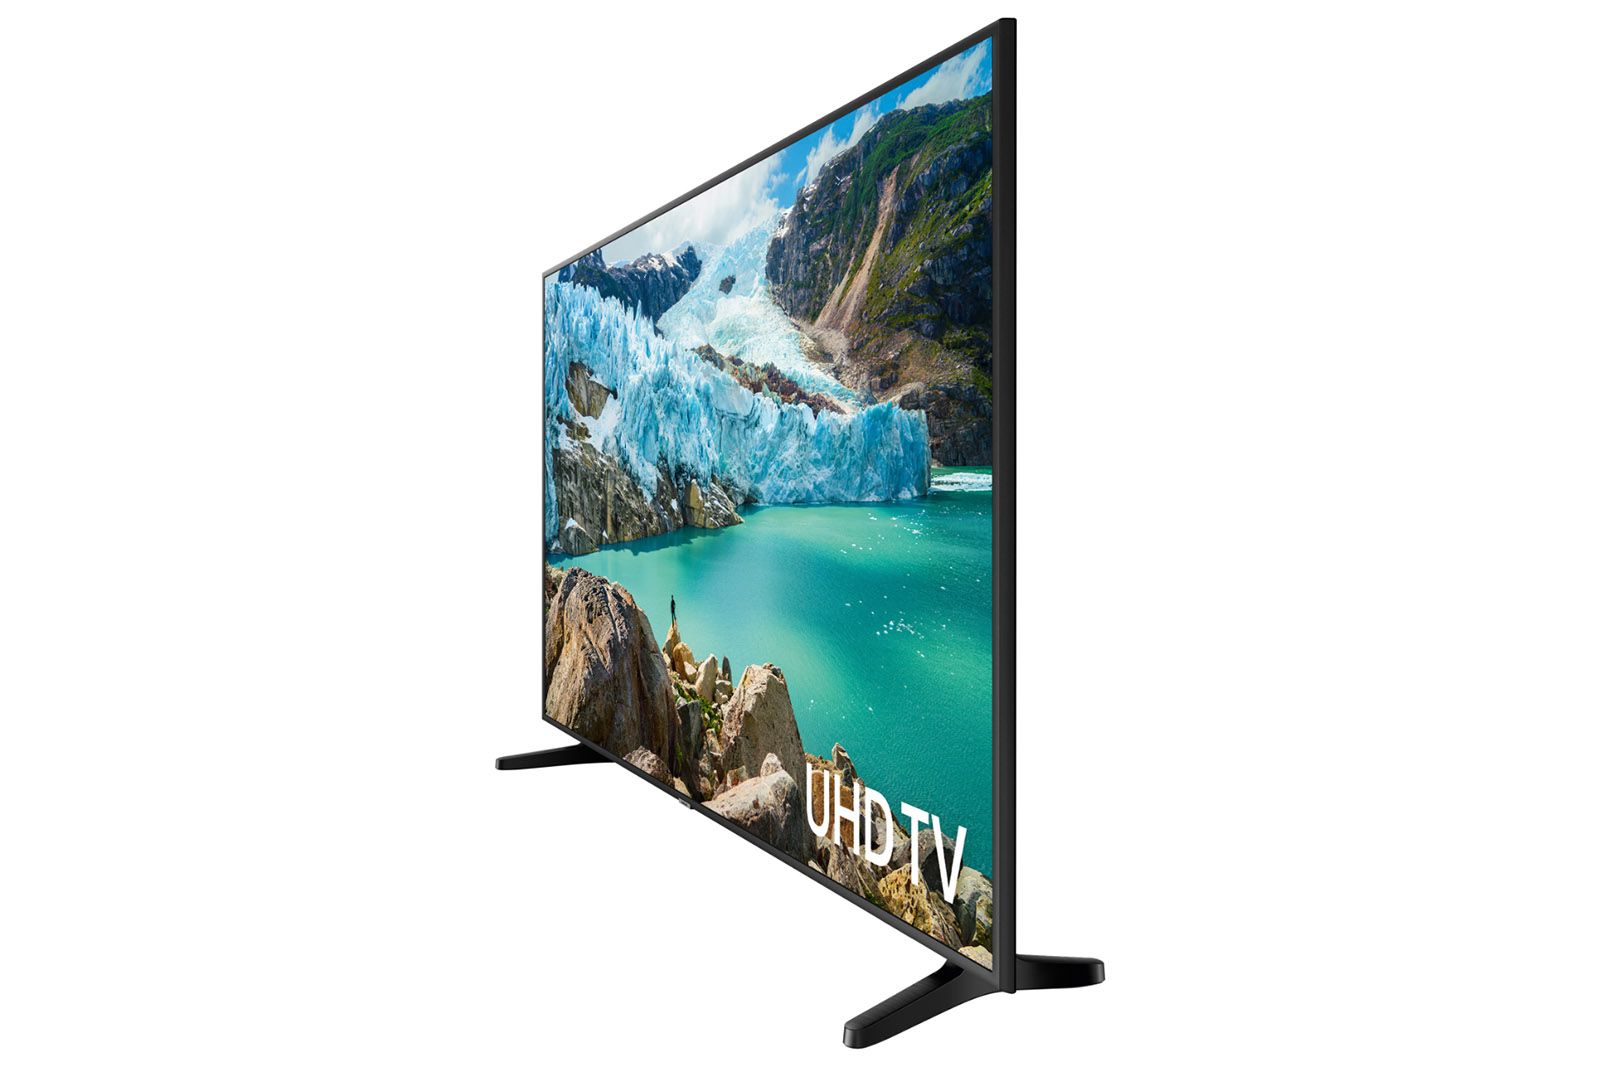 Samsung RU7020 LED TV review official image 3